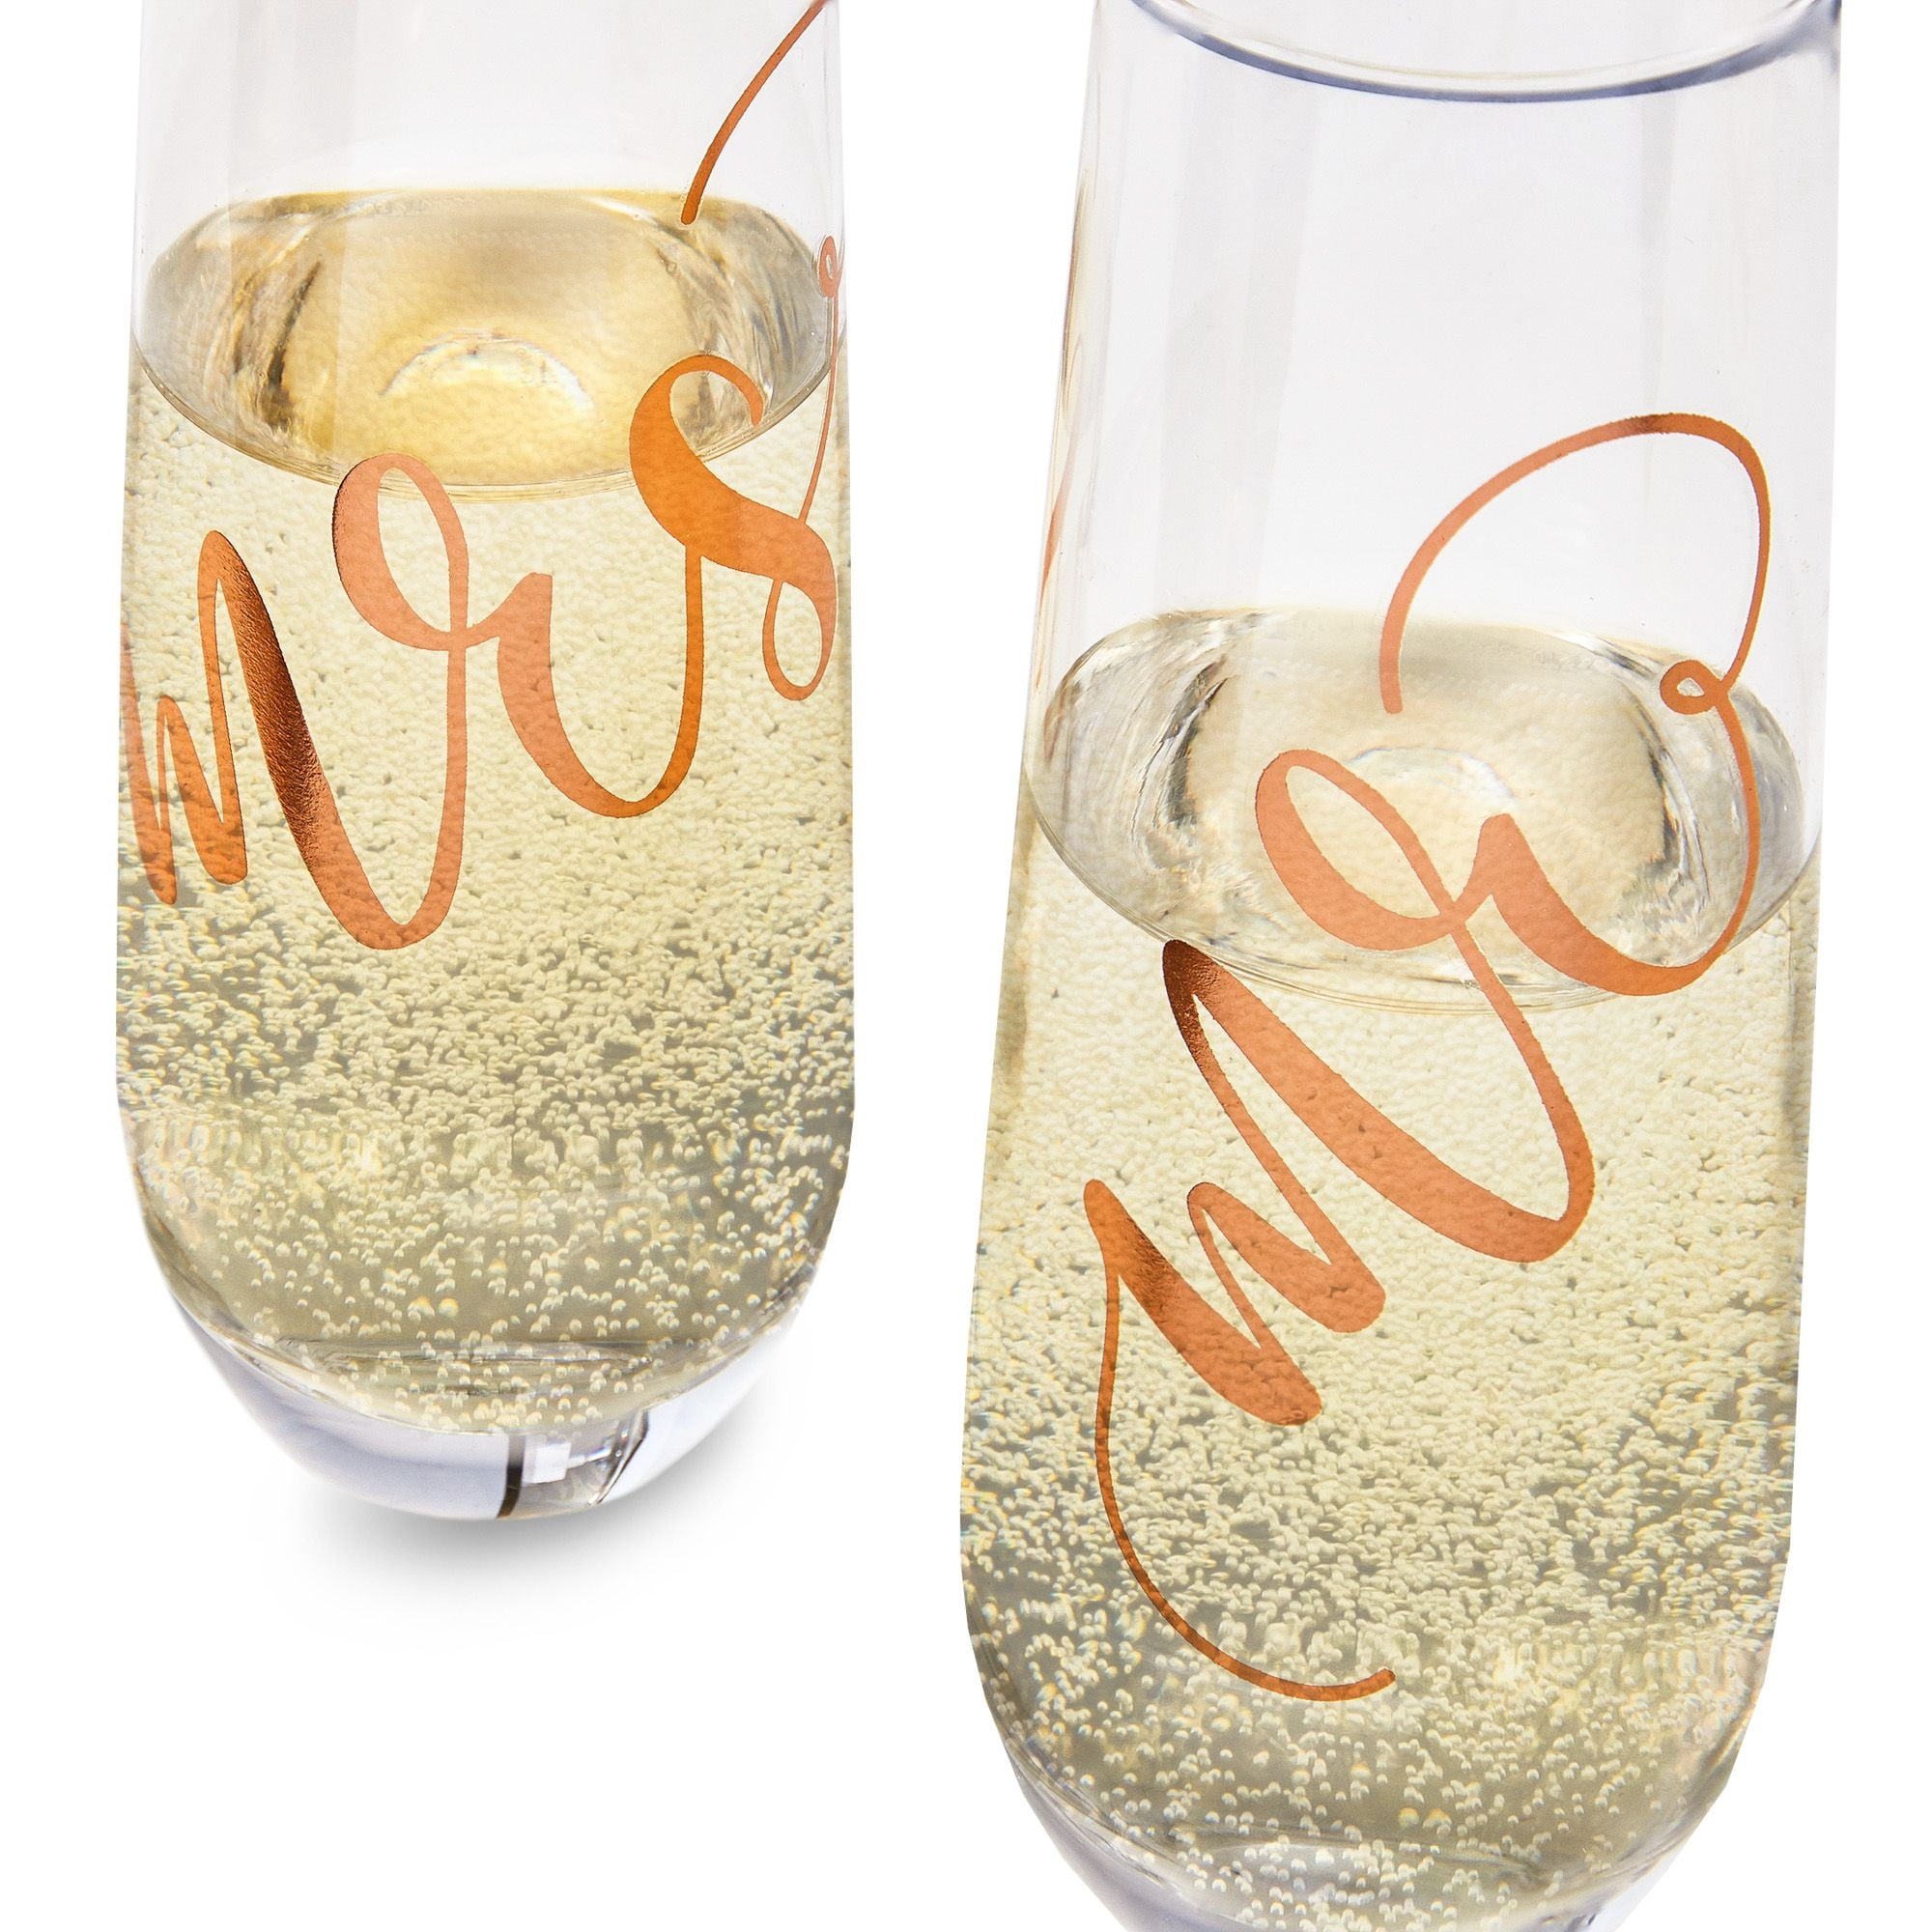 Wedding Day Stemless Champagne Flutes - Set of 2